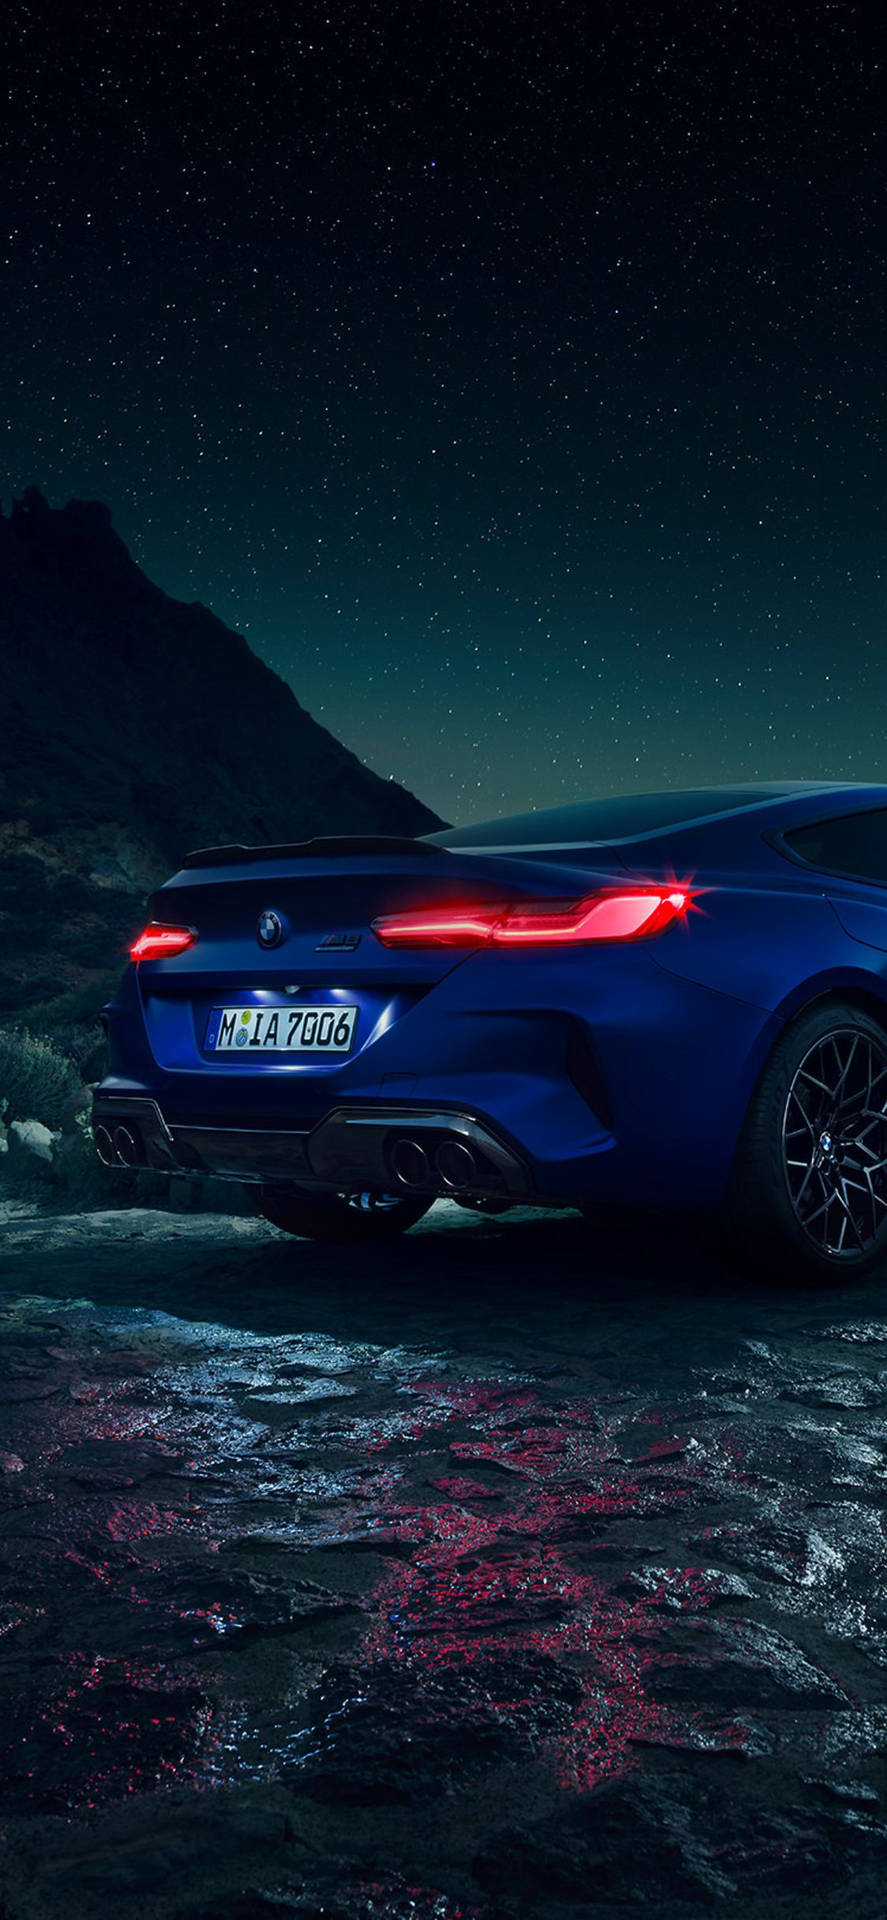 Starry Night And Blue Bmw Wallpaper